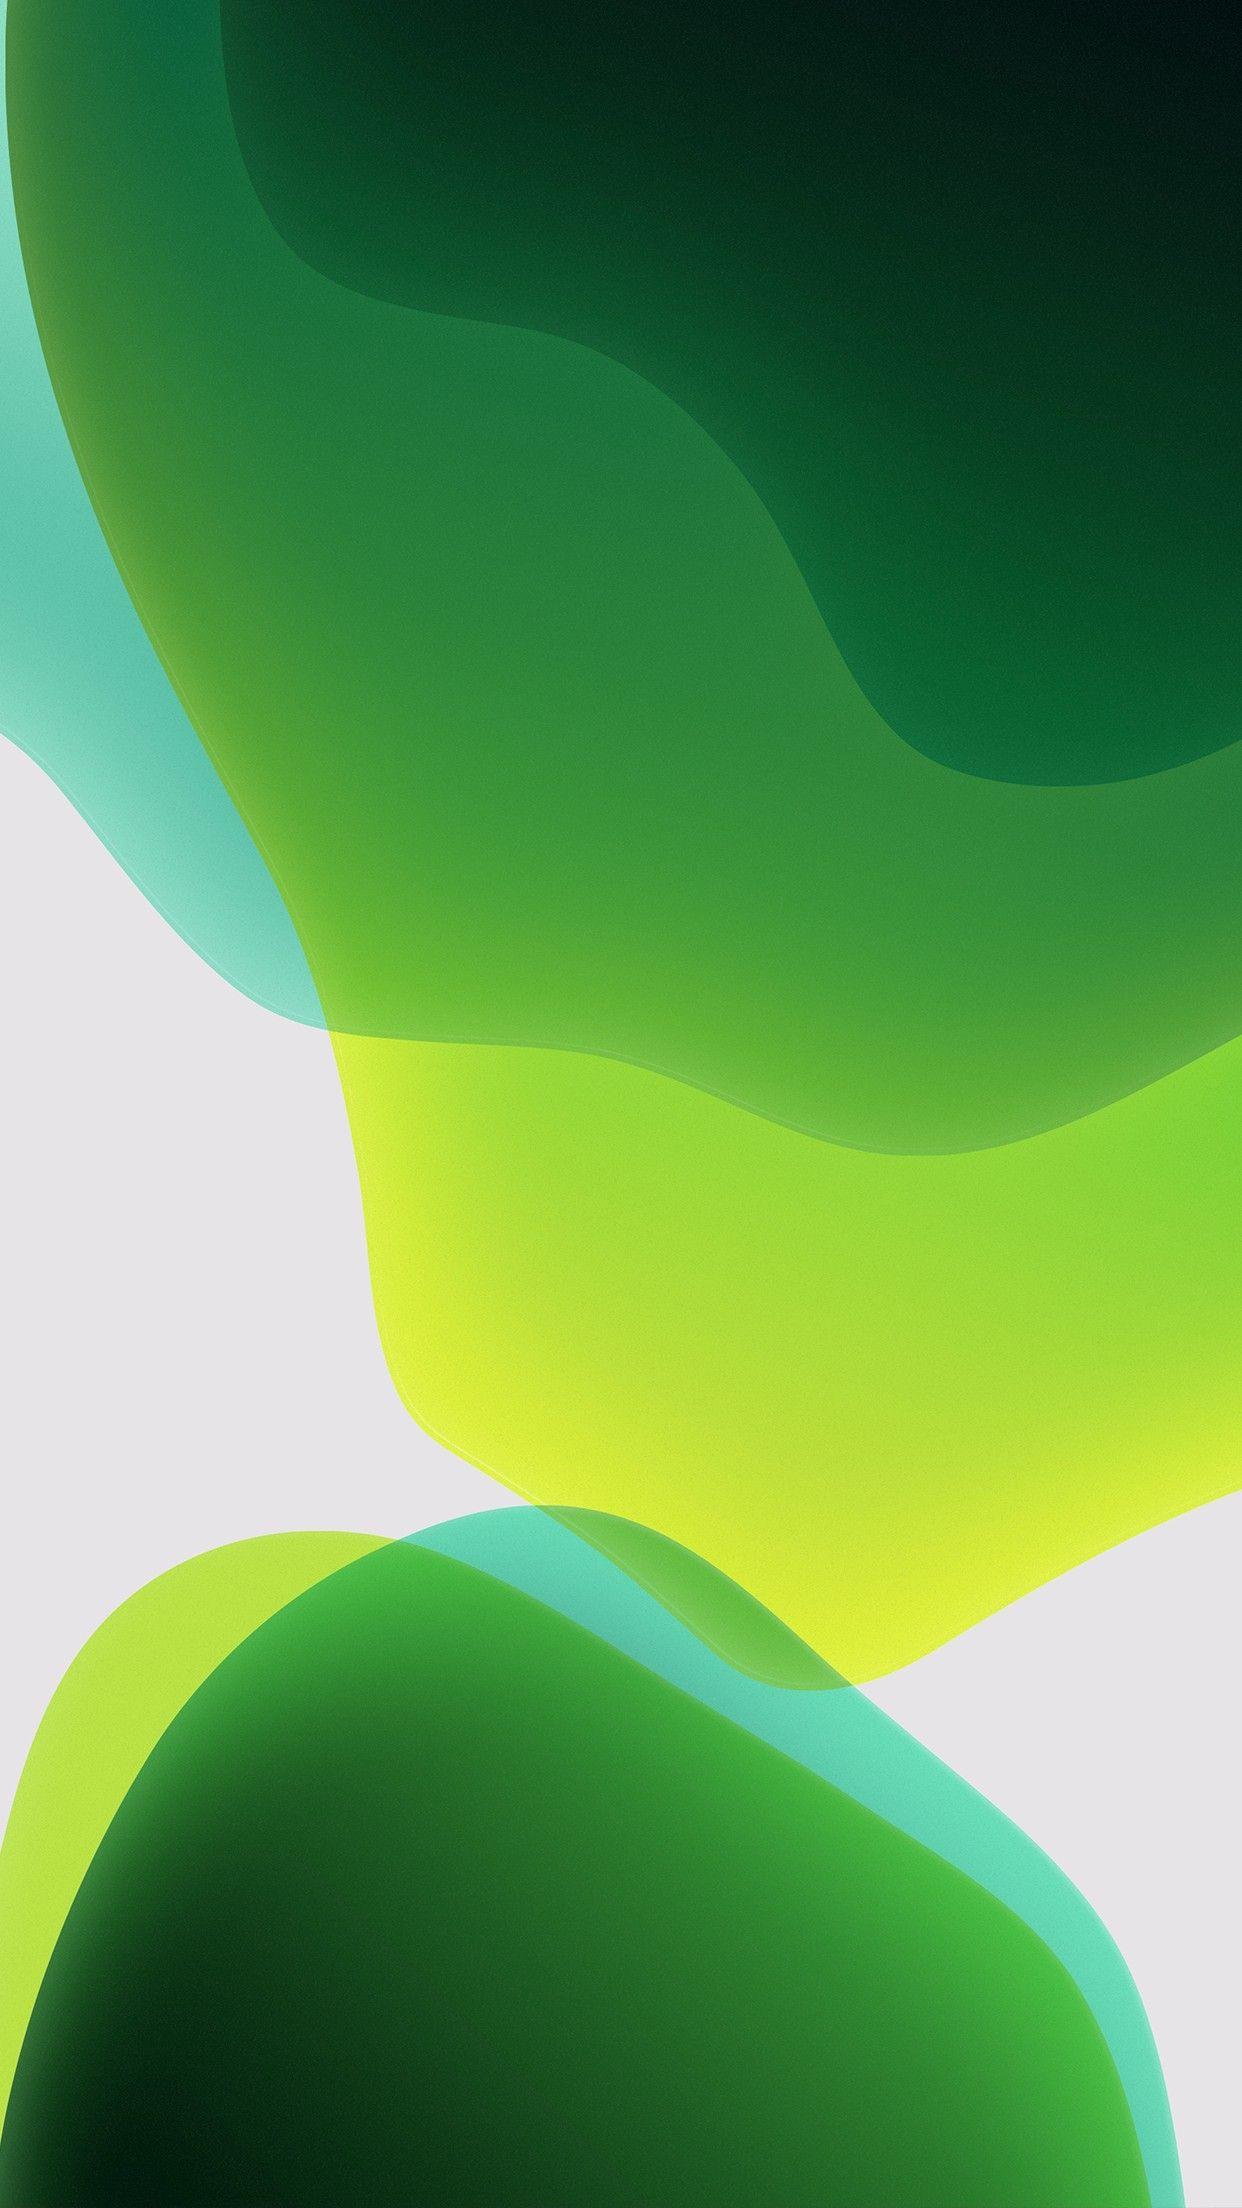 ios 13. Apple wallpaper iphone, Ios wallpaper, Abstract iphone